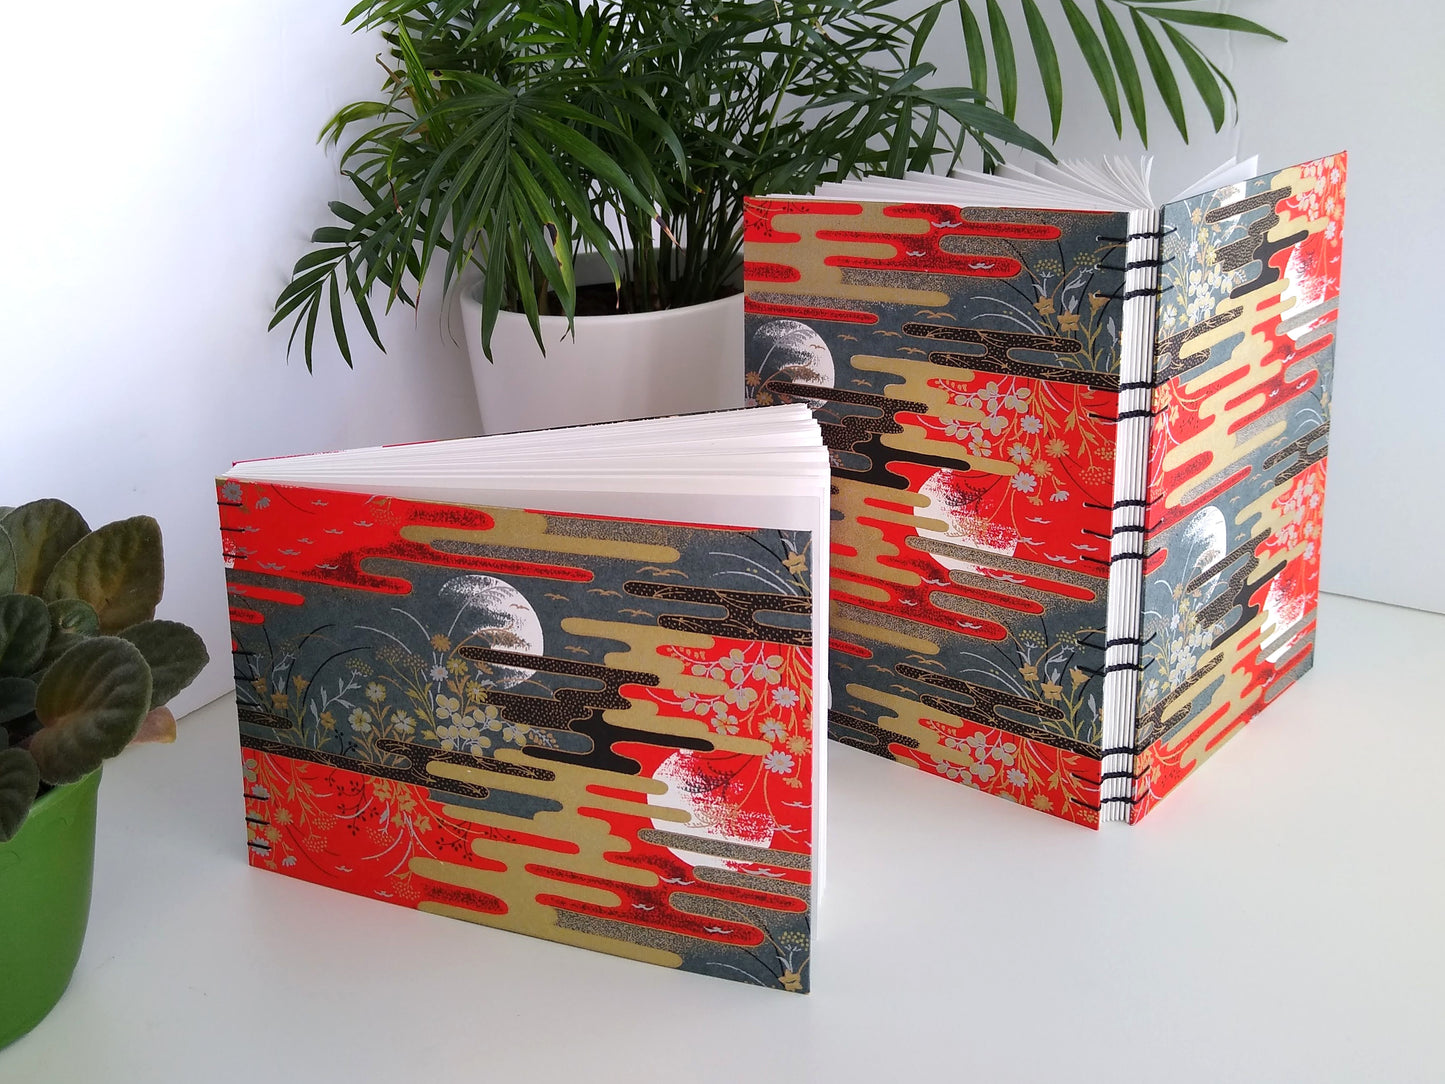 Two handmade journals are standing upright beside two potted plants. The covers of the journals are complete scenes with red and grey skies with partial moon outlines, flowers, birds, and gold and black stylized clouds. One journal is angled to show its open spine and black thread stitching it together.